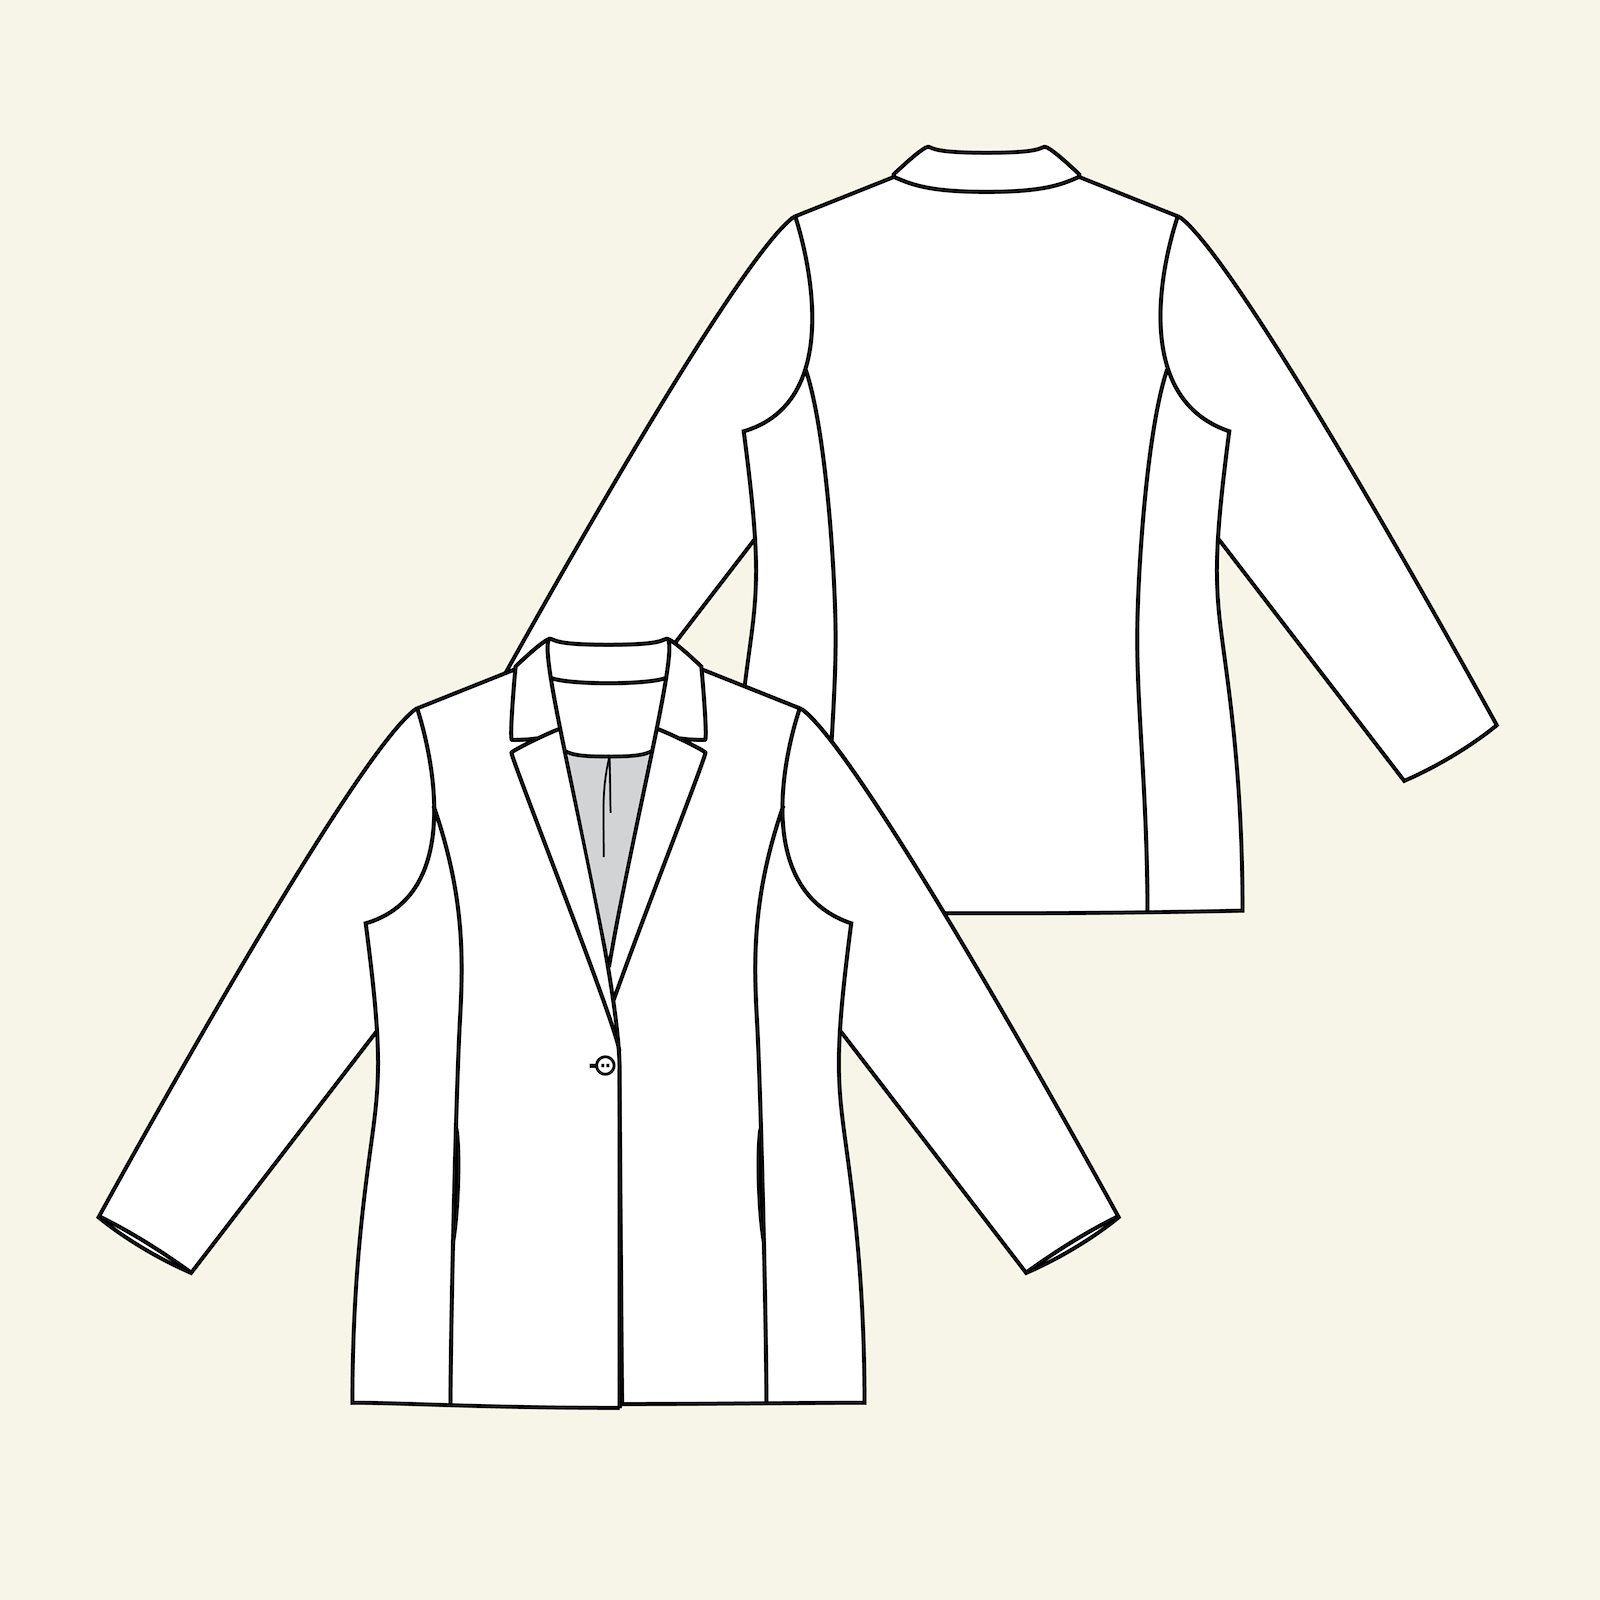 Suit jacket with lining, 36/8 p24048_pack